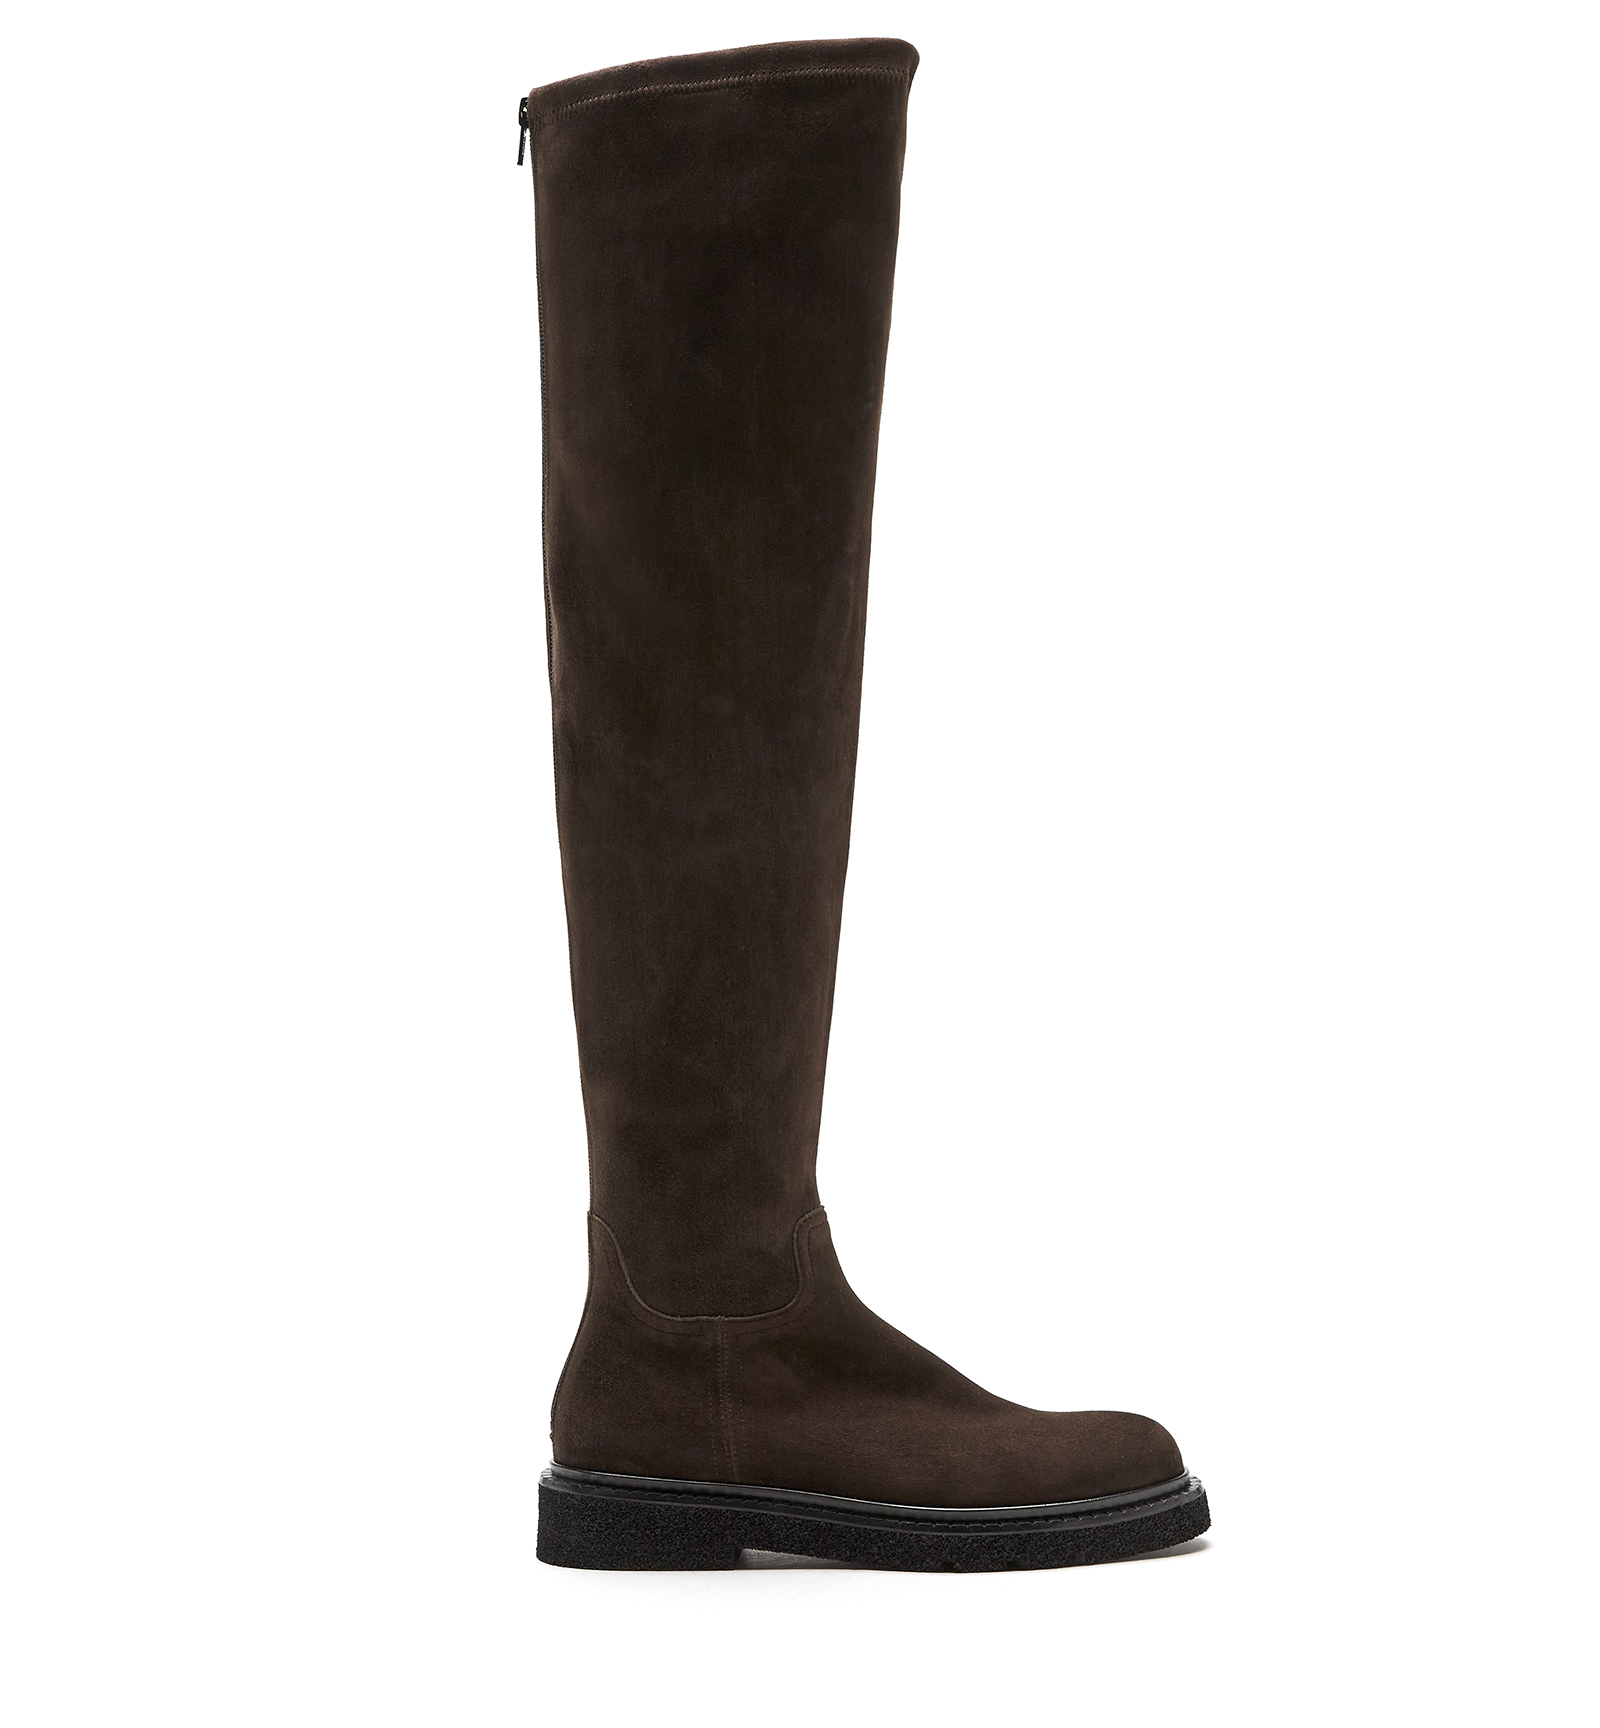 La Canadienne Reotk Suede Boot In Chocolate